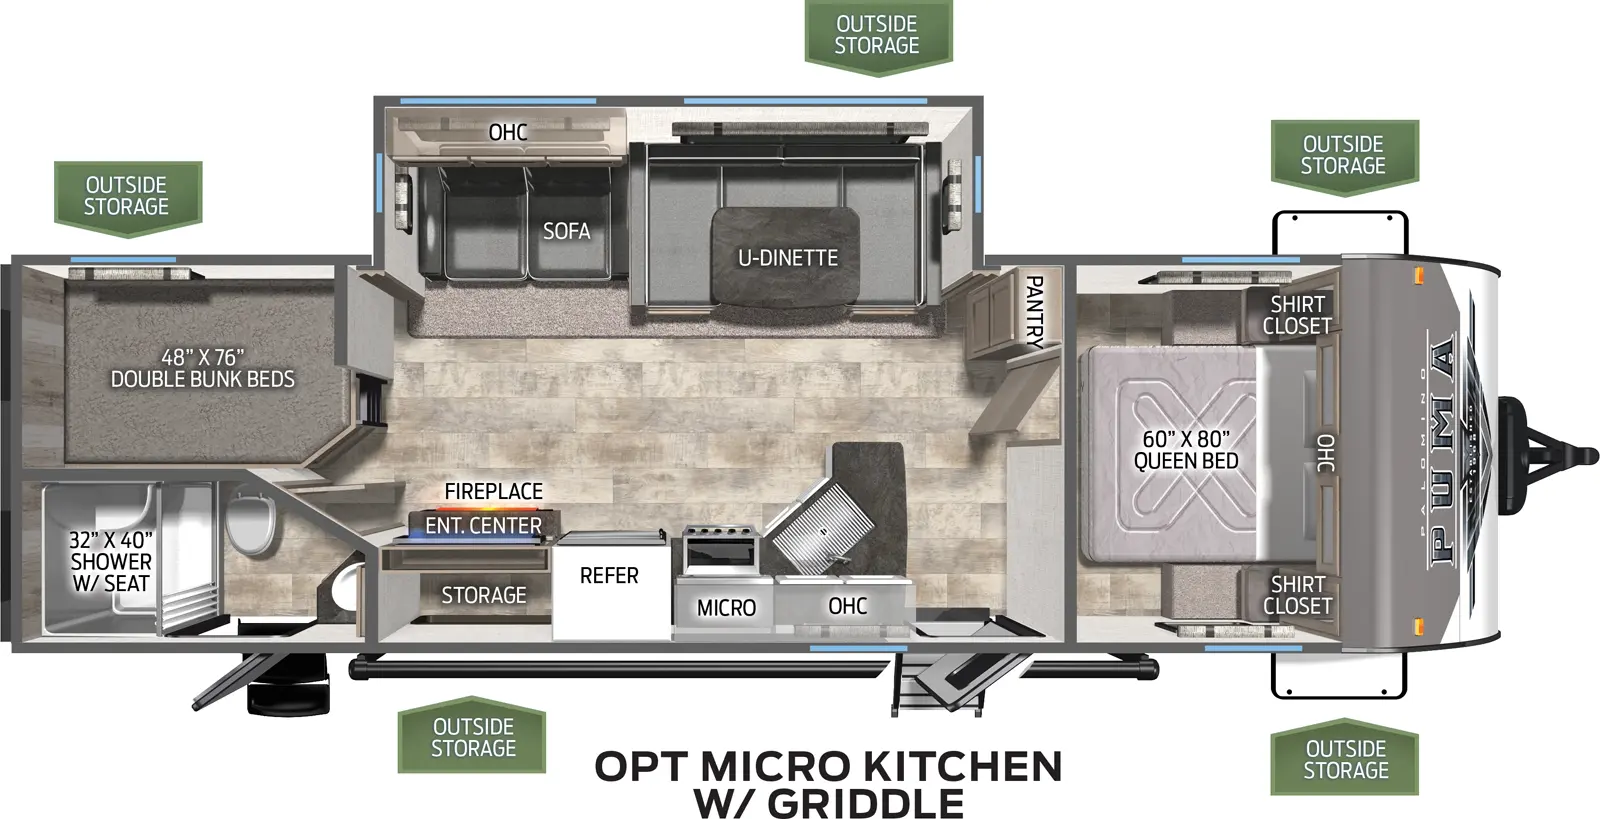 The 28DBFQ has one slide out on the off door side. Exterior features include a 21 foot awning on the door side along with two exterior doors and a micro outside kitchen with griddle. Interior layout from front to back: front bedroom with queen bed; leads out into kitchen and living area with a pantry, L-shaped countertop, microwave, residential refrigerator, and a cooktop stove; across is the slide out containing a U-dinette and a three cushion sofa; across is the entertainment center; bathroom; double stacked bunk beds with storage underneath.